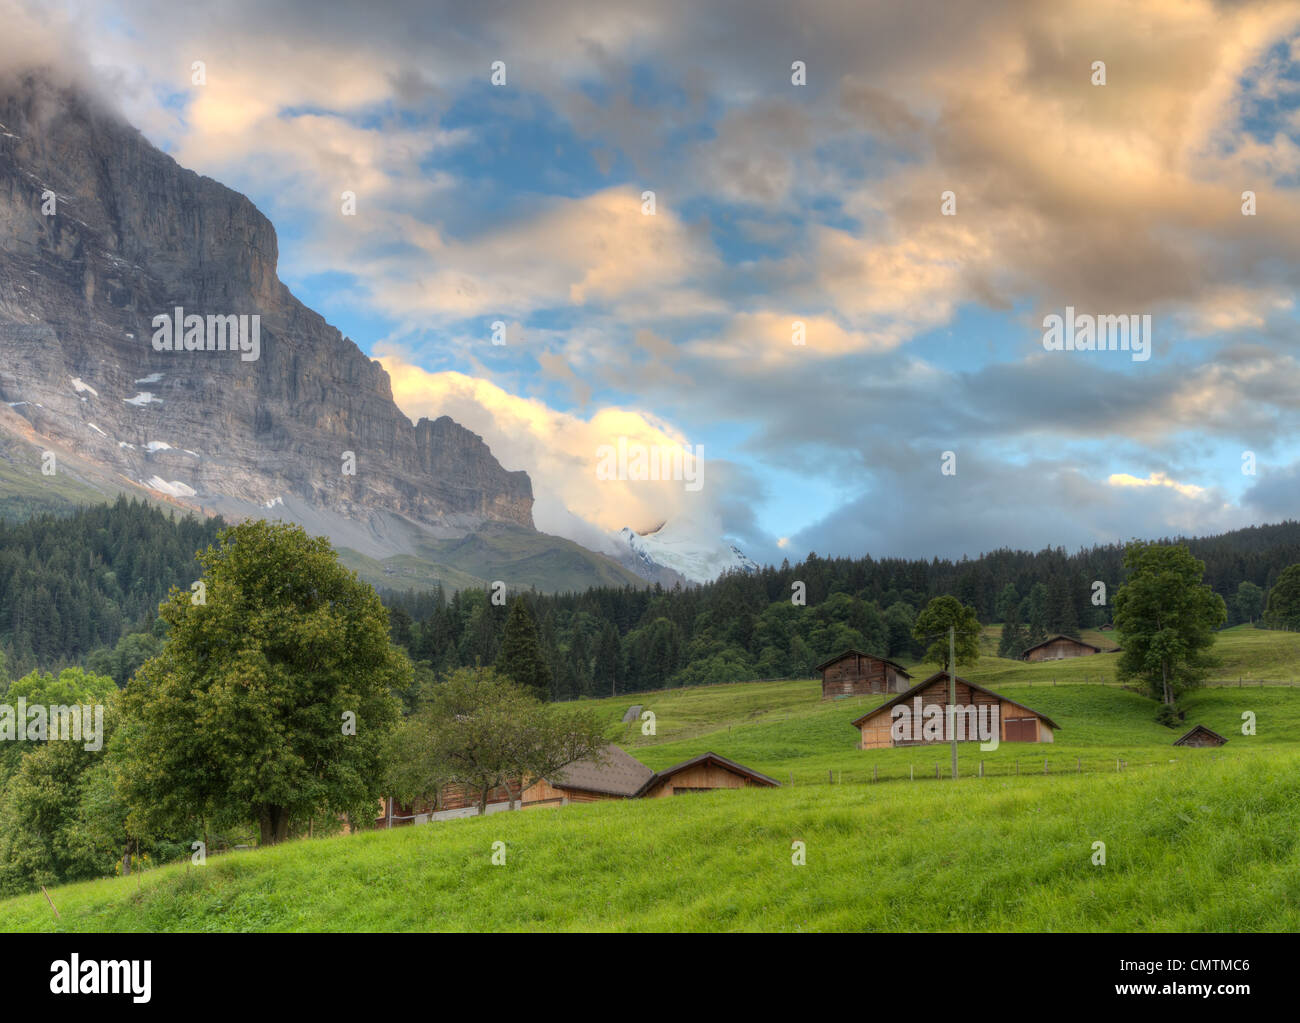 Mountain huts in valley at sunset in front of mountain Eiger north face, Switzerland Stock Photo